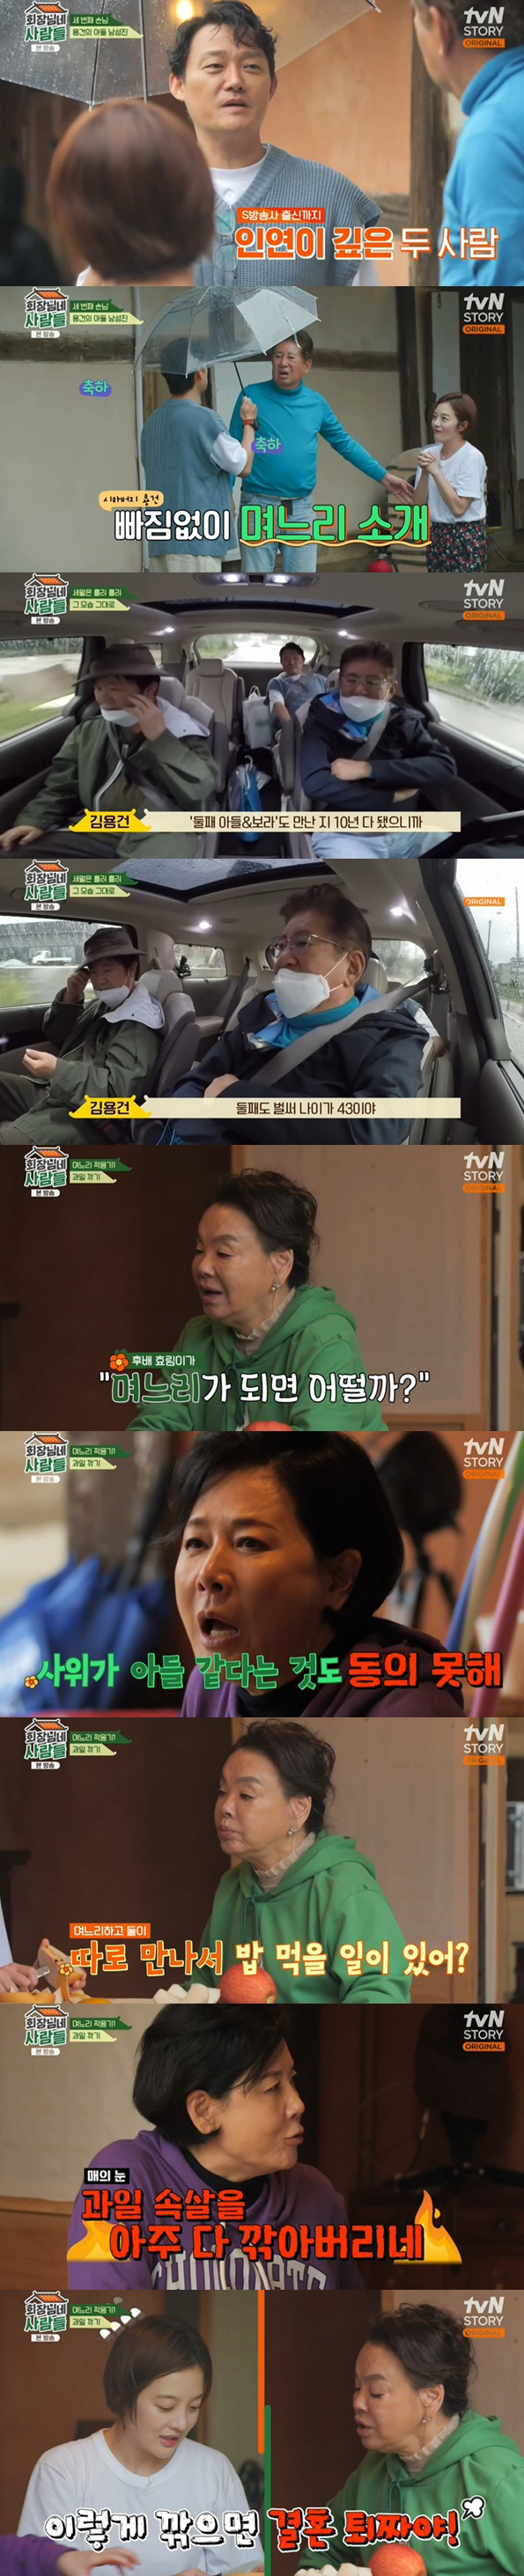 Chairmans people Hwang Bo Ra said he is trying to have a second-generation in vitro procedure.In the TVN STORY Chairmans People broadcast on the 14th, the story of the power experience of Actor Kim Yong-gun, Kim Soo-mi, Lee Gye-in, Hwang Bo Ra and Park Jung-soo was revealed.On this day, a new guest, Power Diary, attracted the attention of actors from Yeongnam Station.Hwang Bo Ra also excelled and greeted me, and the men greeted me with a welcome saying, It is Bora and the school.When asked about his wife, Actor Kim Ji Young, he said, Its been a month since I left home. I went to Jeju Island for a movie and I have not been there for over a month.I am staying at Jeju Island, not going back and forth. Kim Yong-gun missed Kim Ji Young, saying, I want to see a good length. Kim Yong-gun While the male members went to see the dinner preparations, Kim Soo-mi and Park Jung-soo took a look at Hwang Bo Ra and conducted a daughter-in-law test to give tension and laughter.First tested fruit-cutting, and Hwang Bo Ra was storm-pointed to Kim Soo-mi and Park Jung-soo for thickening the rind, Kim Soo-mi said, If youre like your old mother-in-law, youre getting married.What if you cut the inside of the fruit like this? Cut the skin thinly, he advised.Park Jung-soo told Hwang Bo Ra, If you cut the fruit beautifully, you will have a pretty daughter. Hwang Bo Ra said, I want to have that daughter.Kim Yong-gun and Park Jung-soo asked Hwang Bo Ra about the second generation plan, and Hwang Bo Ra said, I am preparing a test tube to give birth to a second generation.Ive been doing it for three months, but now Im resting. I failed once. Usually, dozens of eggs are produced, but I can not produce much. I ovulated and failed because I could not get an embryo.Park Jung-soo responded, Its not easy, and Kim Soo-mi said, Its so difficult.Then he said that he would become a twin, he cheered Hwang Bo Ra.Hwang Bo Ra said, Do you have any know-how to have a baby? Kim Soo-mi said, We did not know because we had a baby in our time. Park Jung-soo also said, We were married in our twenties.Once upon a time, when I was over 30 years old, I was an old woman. He then proceeded to play a Daughter-in-Law balance game on the spot.Hwang Bo Ra chose the former, saying that it would be better to call Moy Yat in a short conversation with her mother-in-law, Sometimes I call, but I talk for two to three hours.Kim Soo-mi said that her mother-in-law and Daughter-in-law could not stay like a mother and daughter, and she was surprised to find out that she did not talk or meet after marrying son with Daughter-in-law Seo Hurim.Kim Soo-mi said, I wanted my junior to be Daughter-in-law, but Daughter-in-law is Daughter-in-law.However, Daughter-in-law came and changed clothes.  After Hyorim became Daughter-in-law, they did not meet each other and eat rice. Before marriage, I often met and became friendly, but I became careful because I became a mother-in-law.That evening, Kim Yong-gun touched Daughter-in-law Hwang Bo Ra with warm words.Kim Yong-gun said, How does it feel to come and hang out with the teachers? How precious is the time to spend the day together with my father-in-law in the same pro before marriage. These moments will be memorable forever.Kim Yong-gun said, I am happy and thankful that Bright Bora is our family. It is a lovely daughter-in-law. I will do better and save you.Congratulations on your marriage, he said heartily to Hwang Bo Ra.In his father-in-laws Confessions, Hwang Bo Ra cried, Ill do really well.Hwang Bo Ra poured tears as if he had been with the Kim Yong-gun family for 10 years and said, I really think I should do well with my heart.